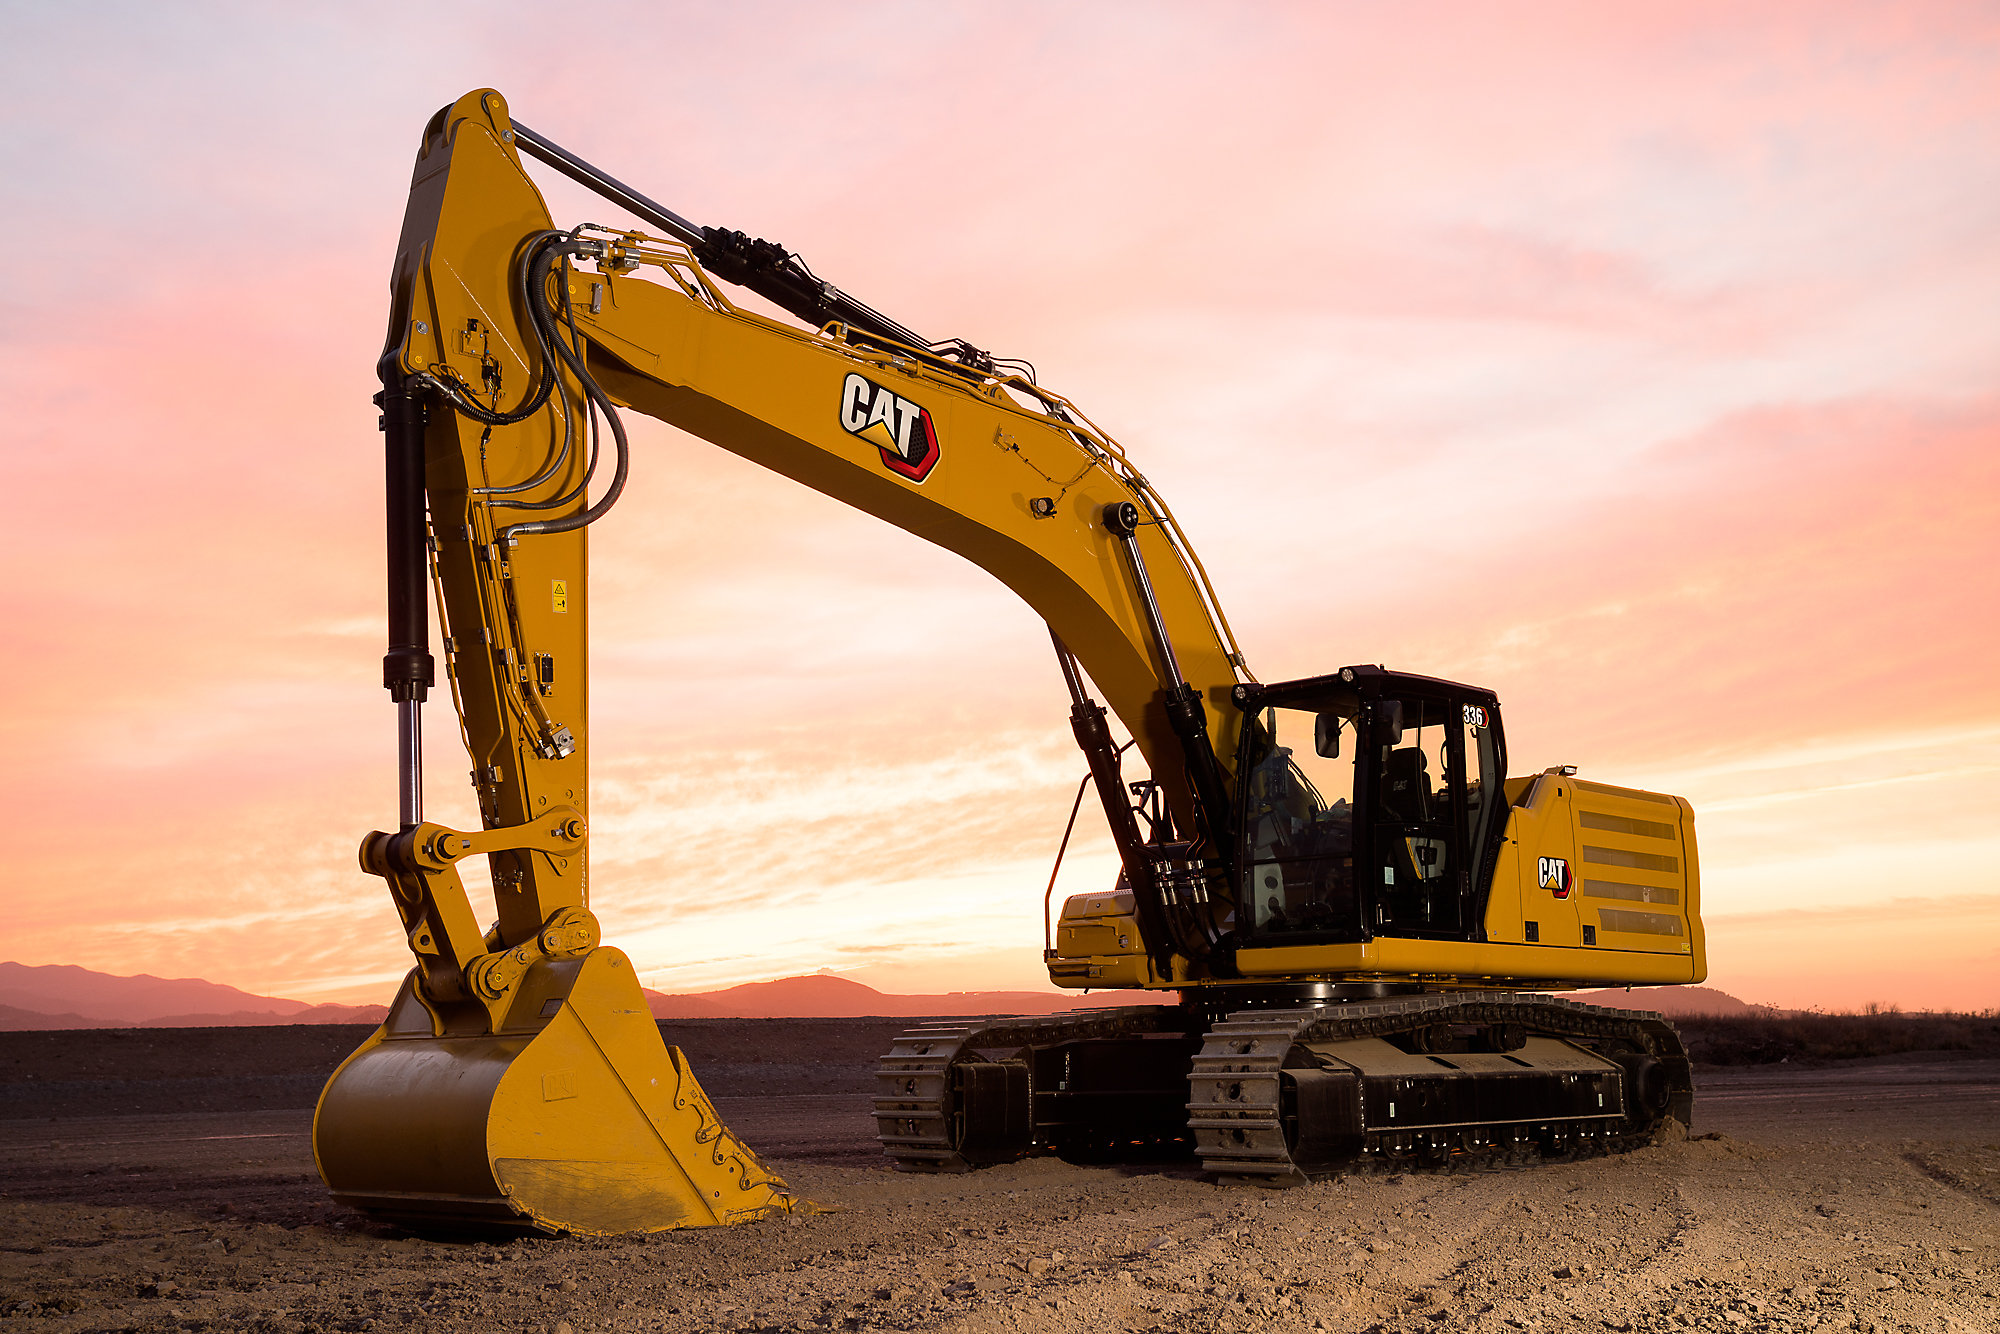 The new Cat 336 hydraulic excavator will be on show at bauma